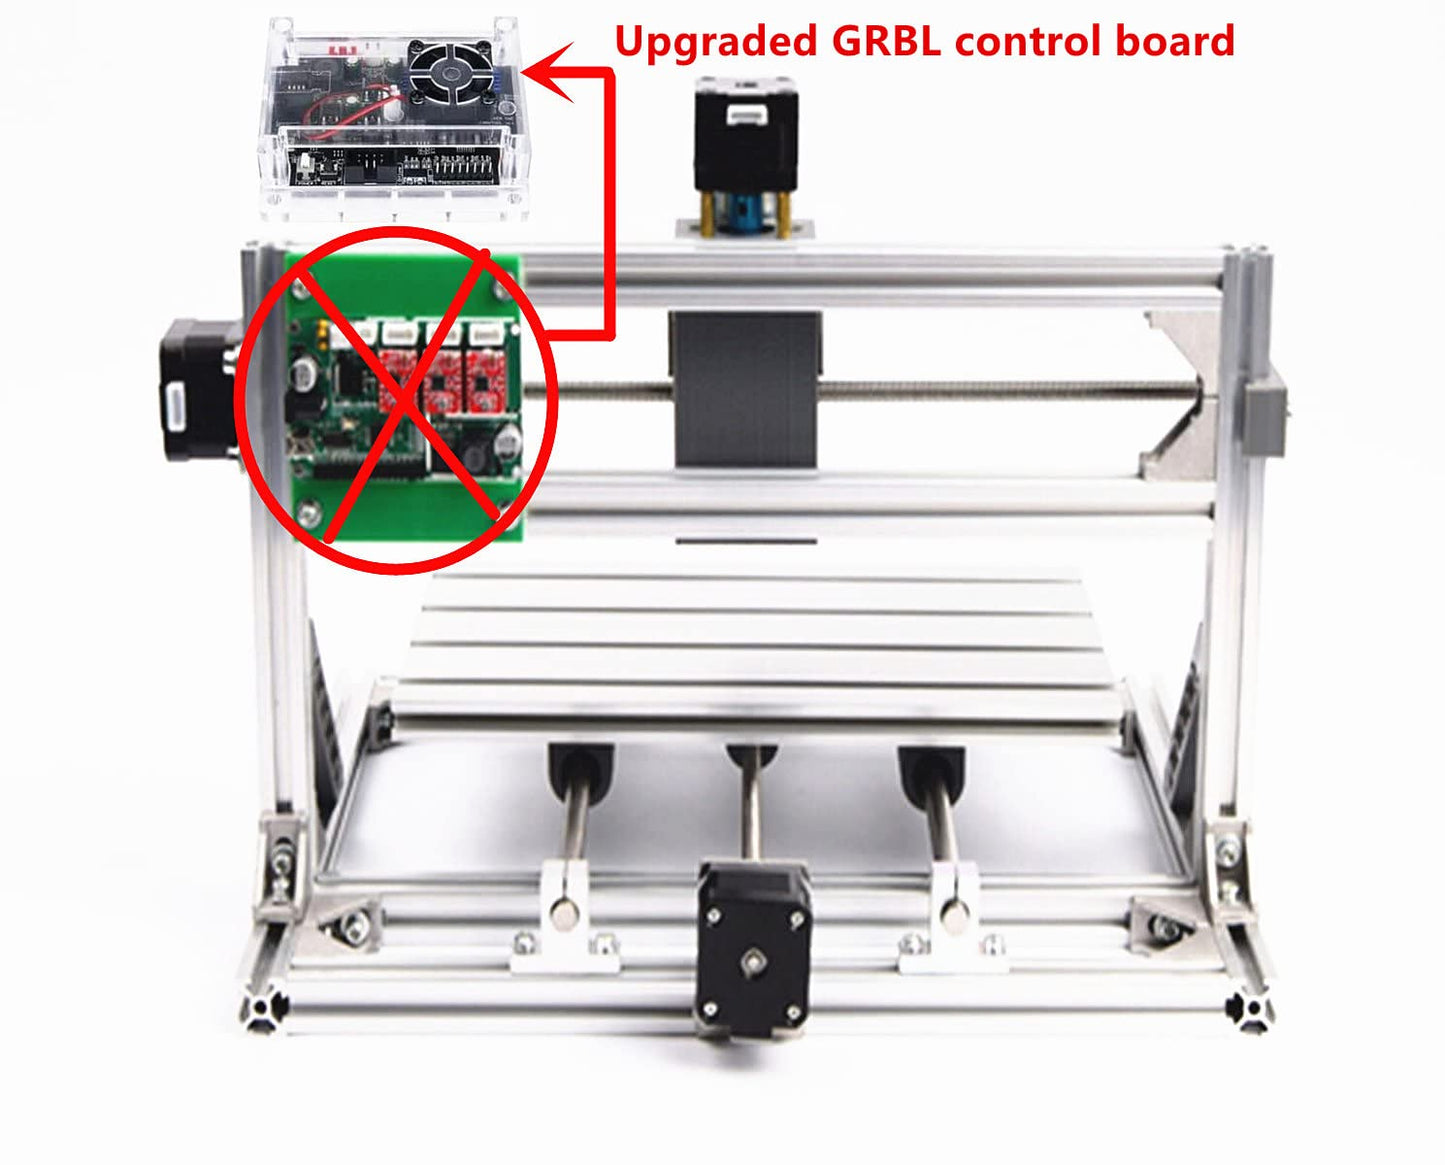 CNCTOPBAOS 3 Axis Desktop DIY Mini CNC 3018 Router Kit GRBL Control Plastic Acrylic PCB PVC Wood Carving Milling Engraving Machine Working Area